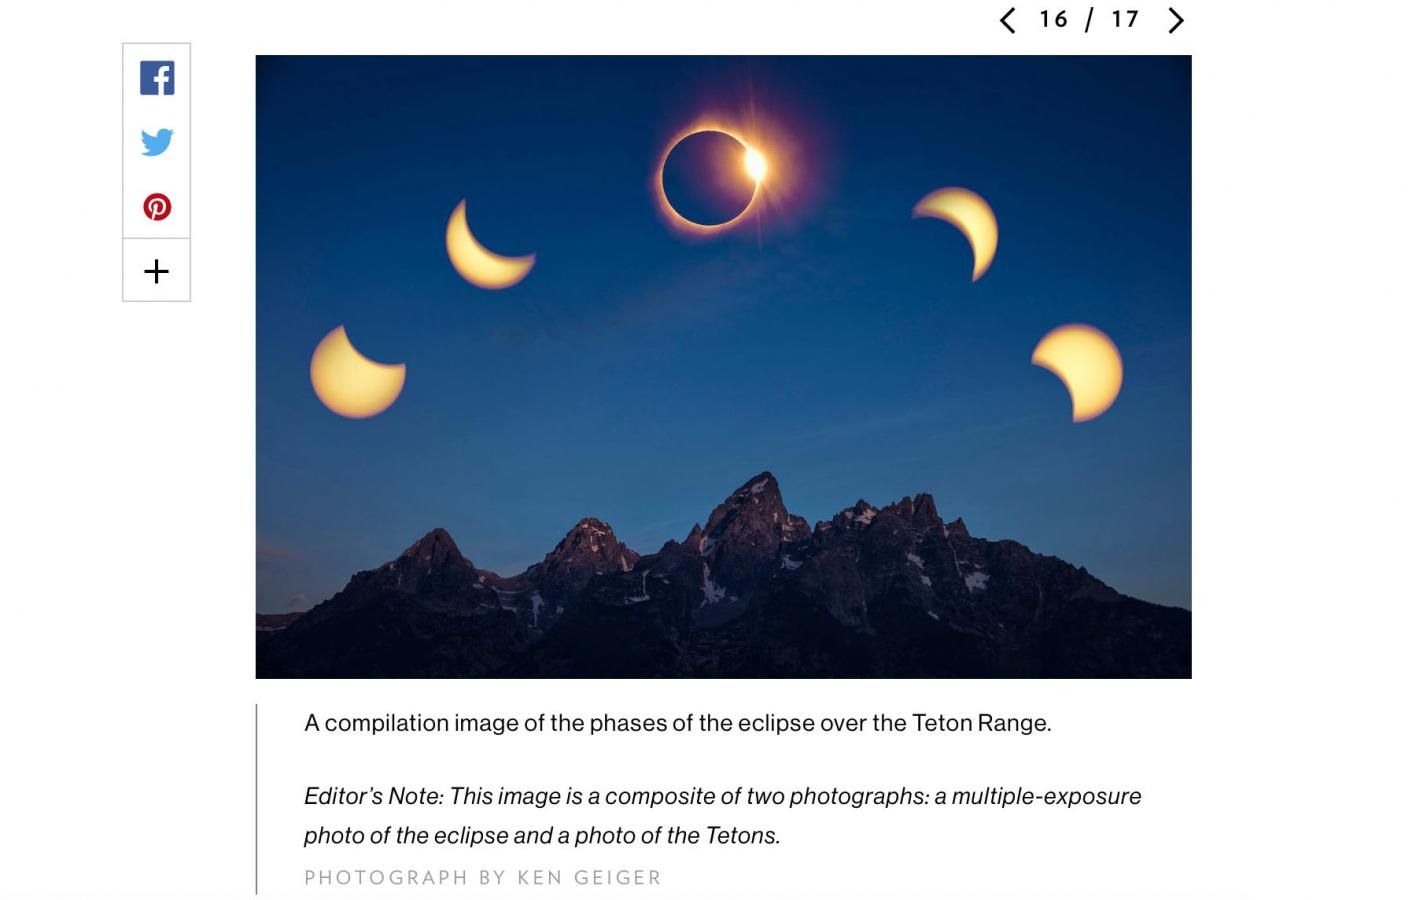 Eclipse Composite Photo is Beautiful, But Not Real | NPPA